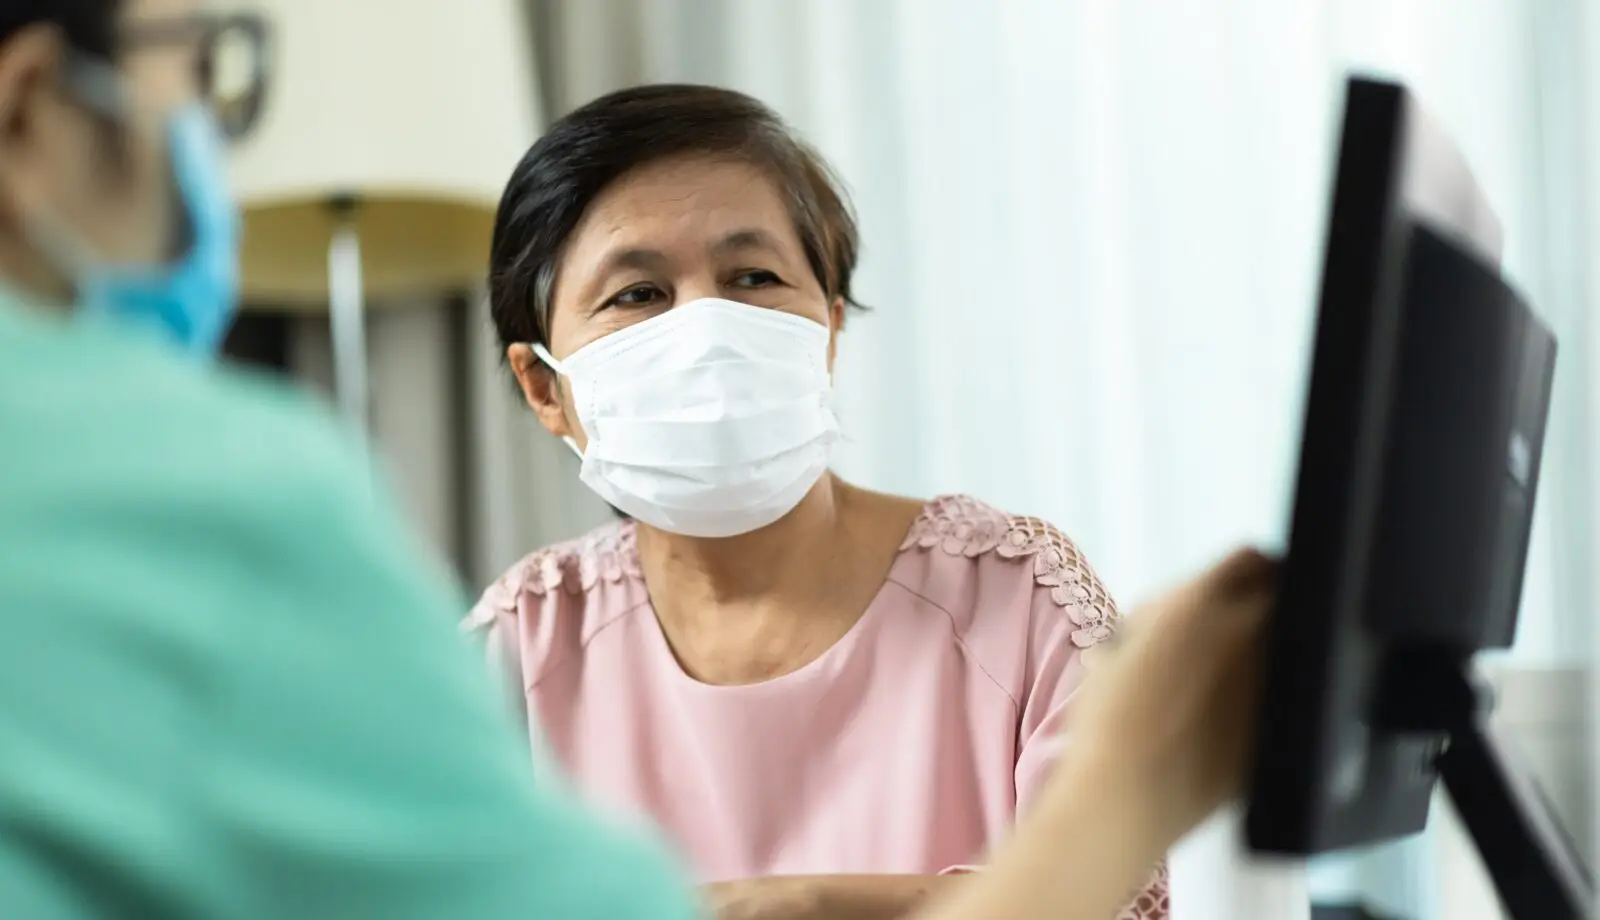 A medical doctor is showing results to a female patient wearing COVID-19 face masks on screen.